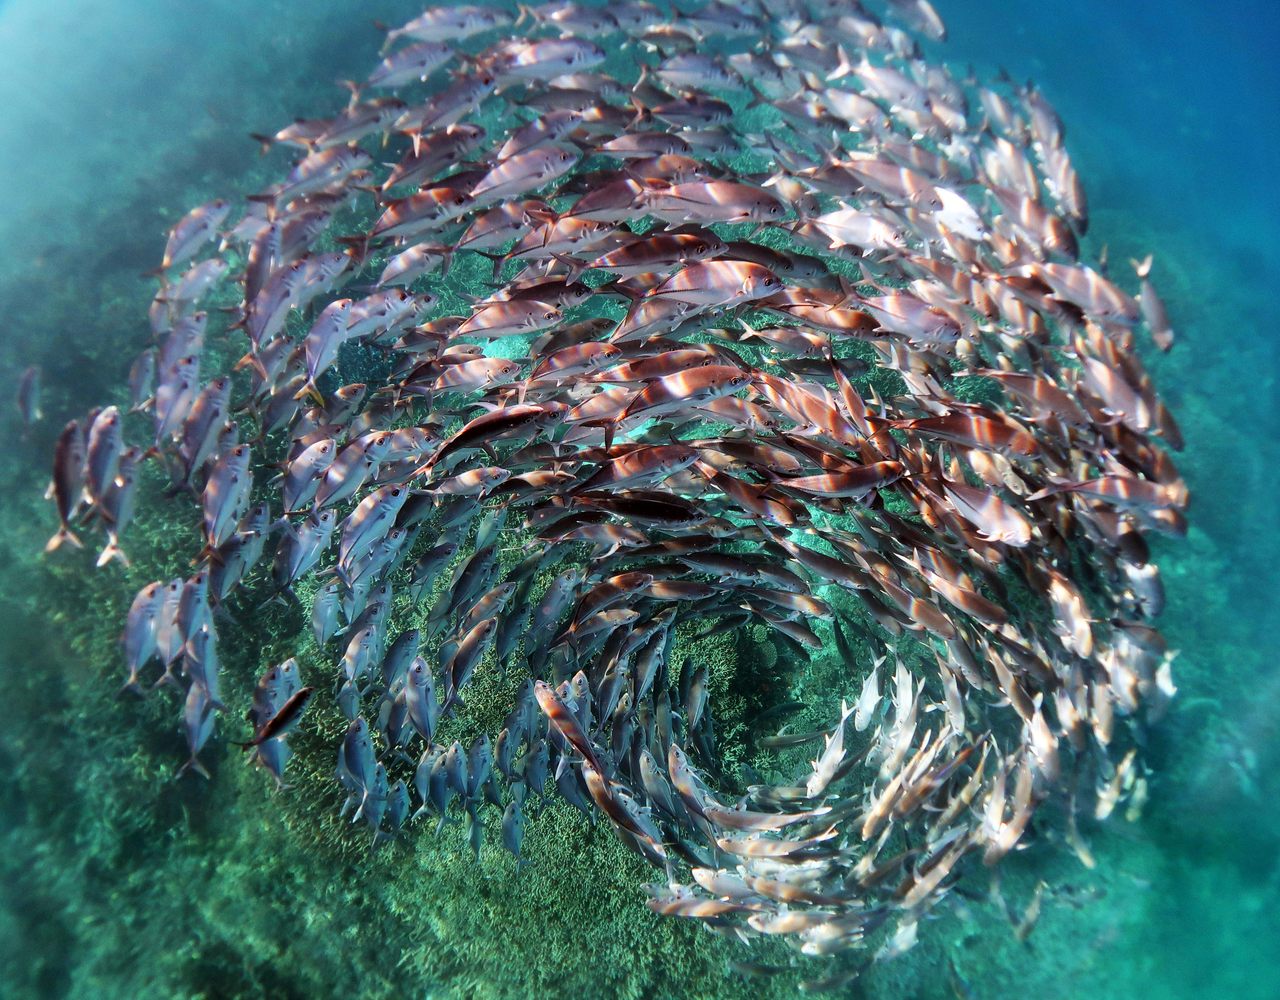 A spiral formation of jack fish in Heron Island's harbor was the winner of <em>BMC Ecology and Evolution</em>'s inaugural photo competition.